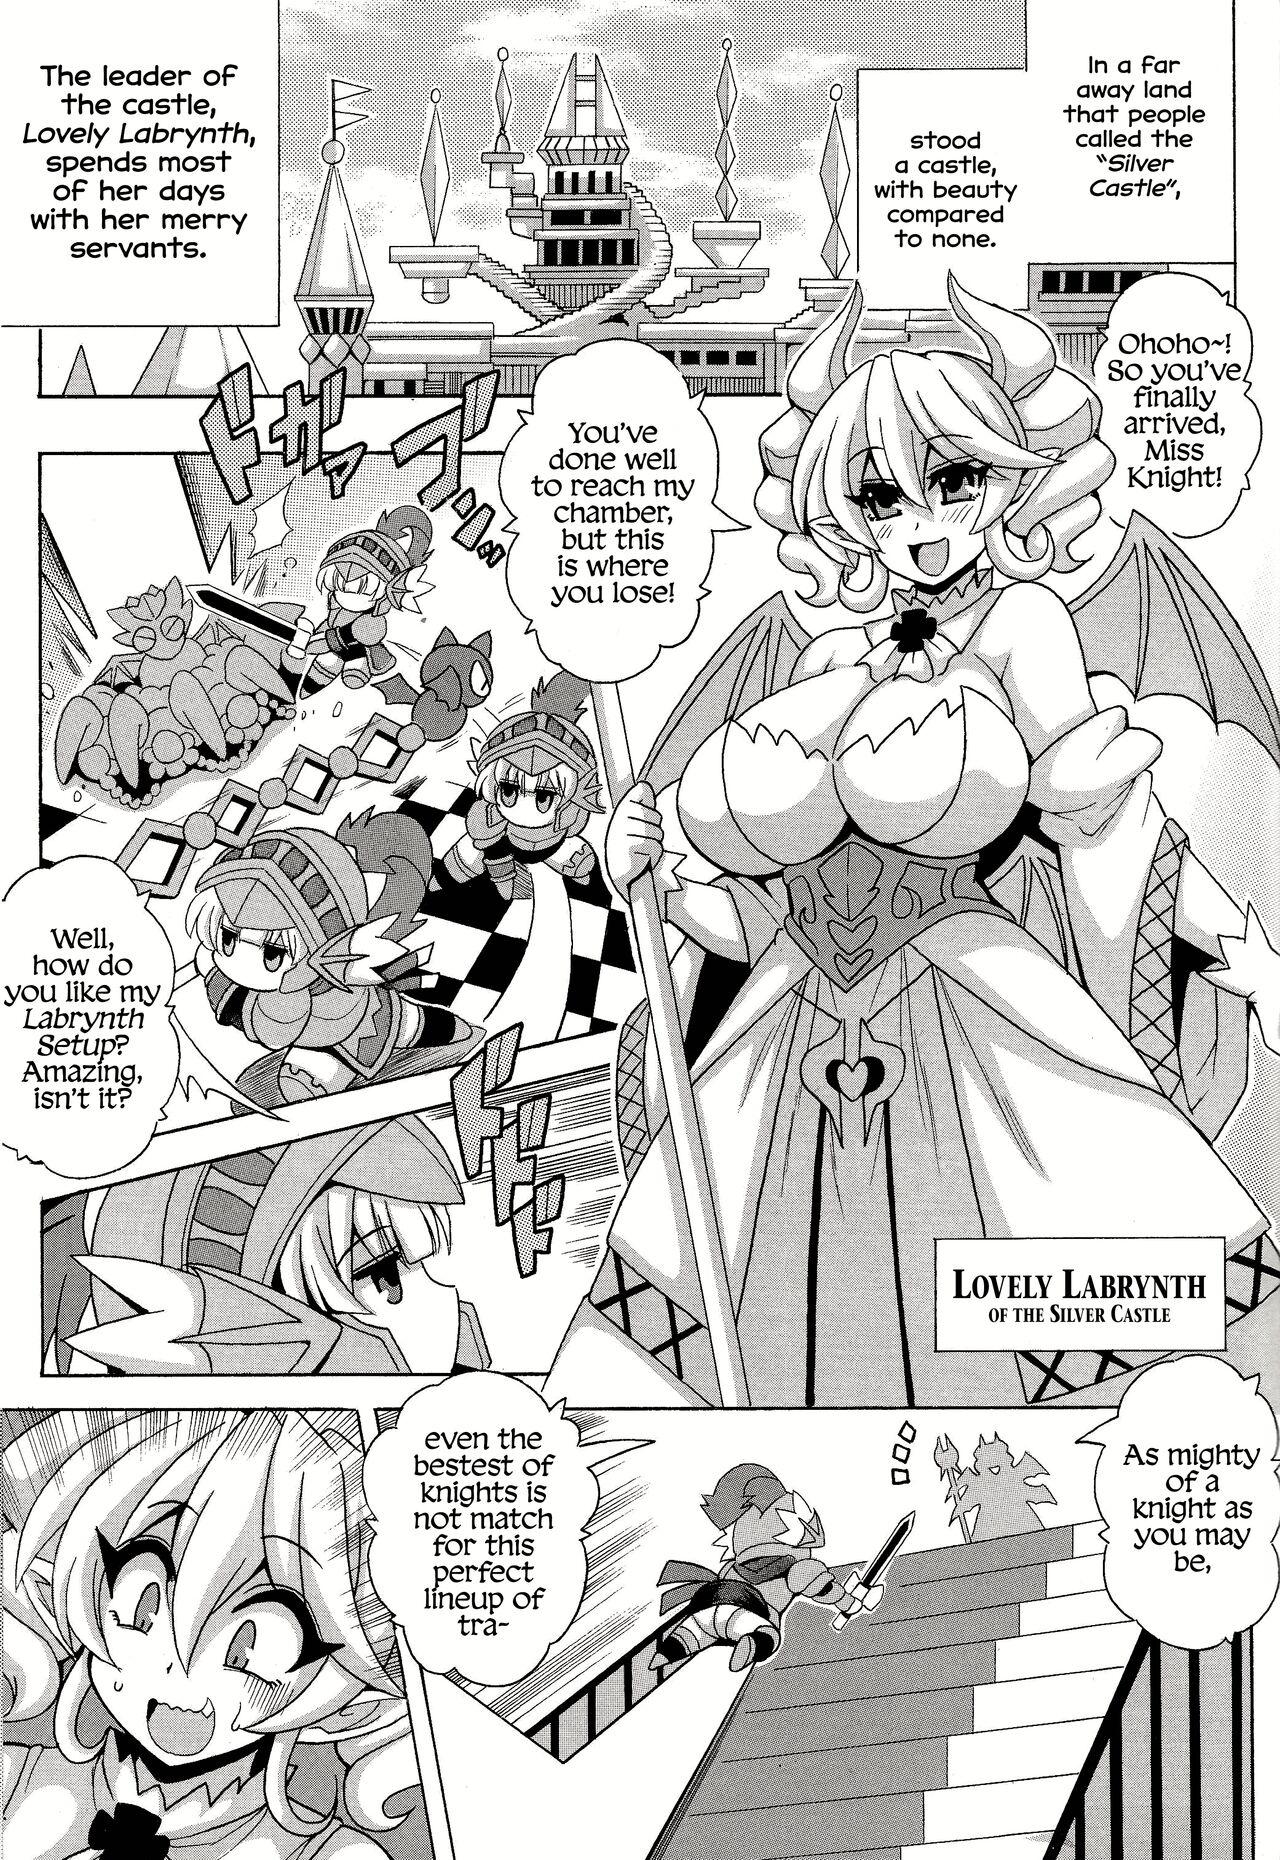 Con LABRYNTH MILK - Yu gi oh Face Fucking - Page 2